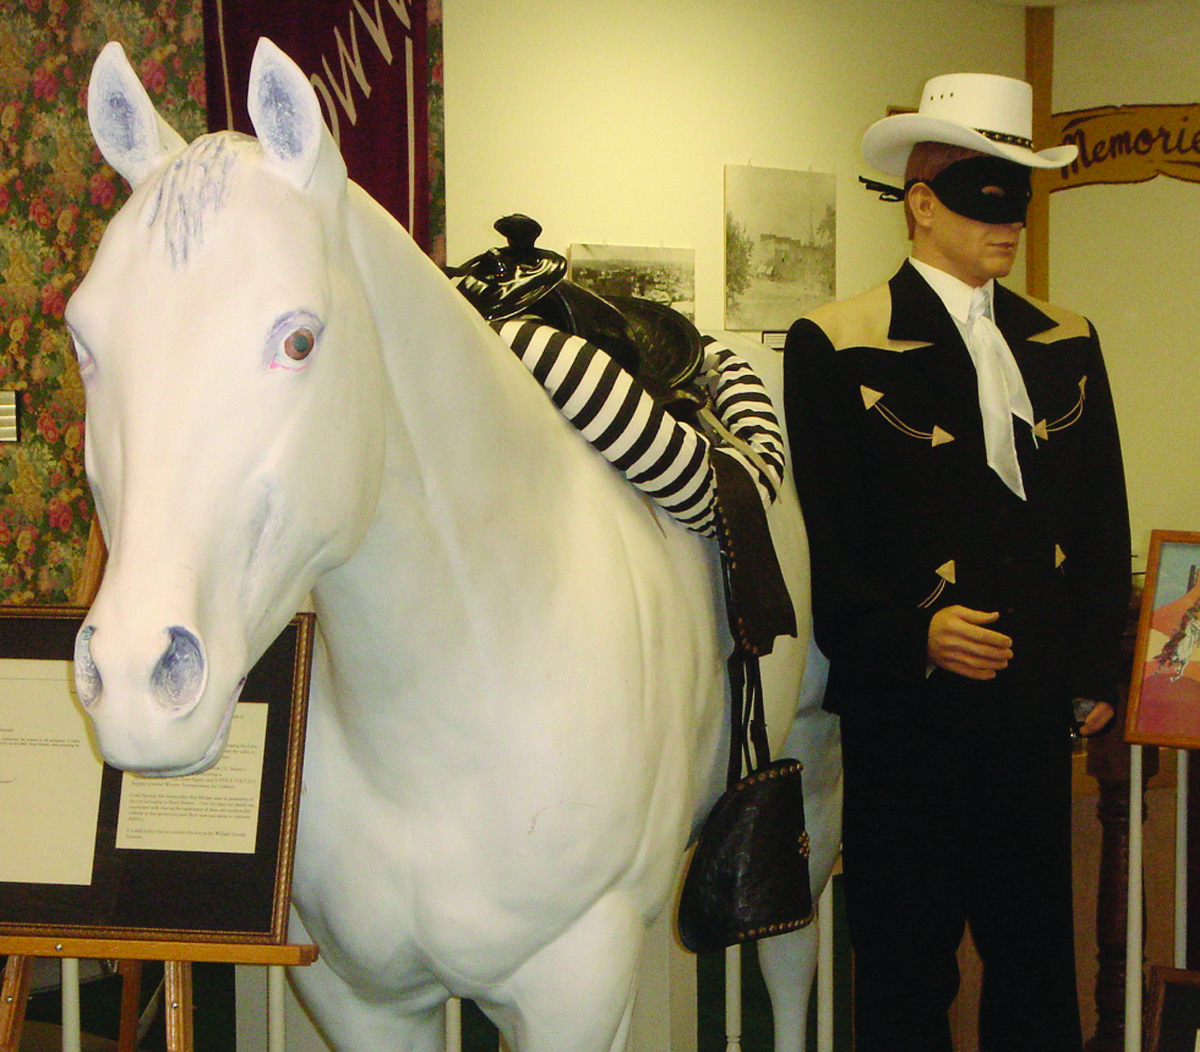 Experience Rich History at the Wabash County Museum!